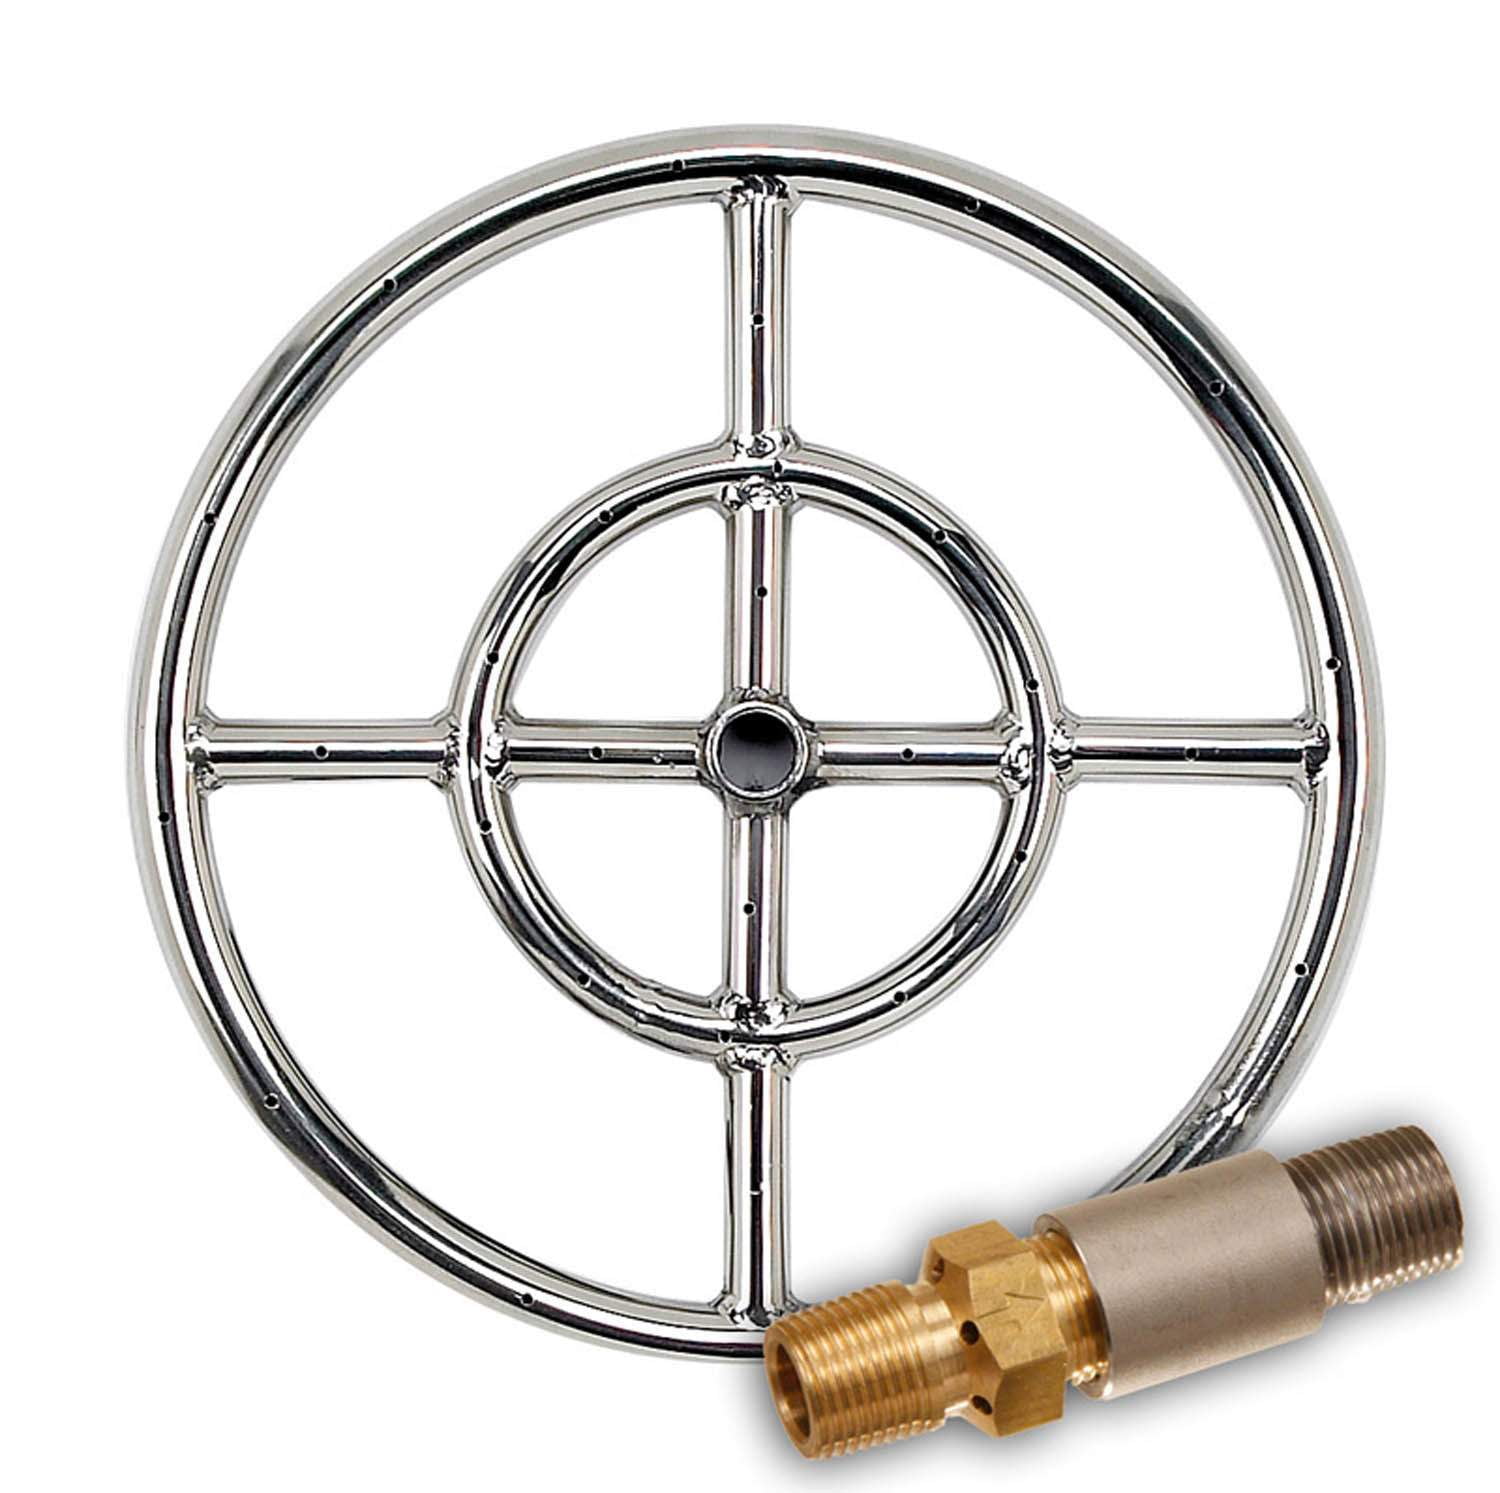 American Fireglass Round Stainless, Stainless Steel Fire Pit Burner